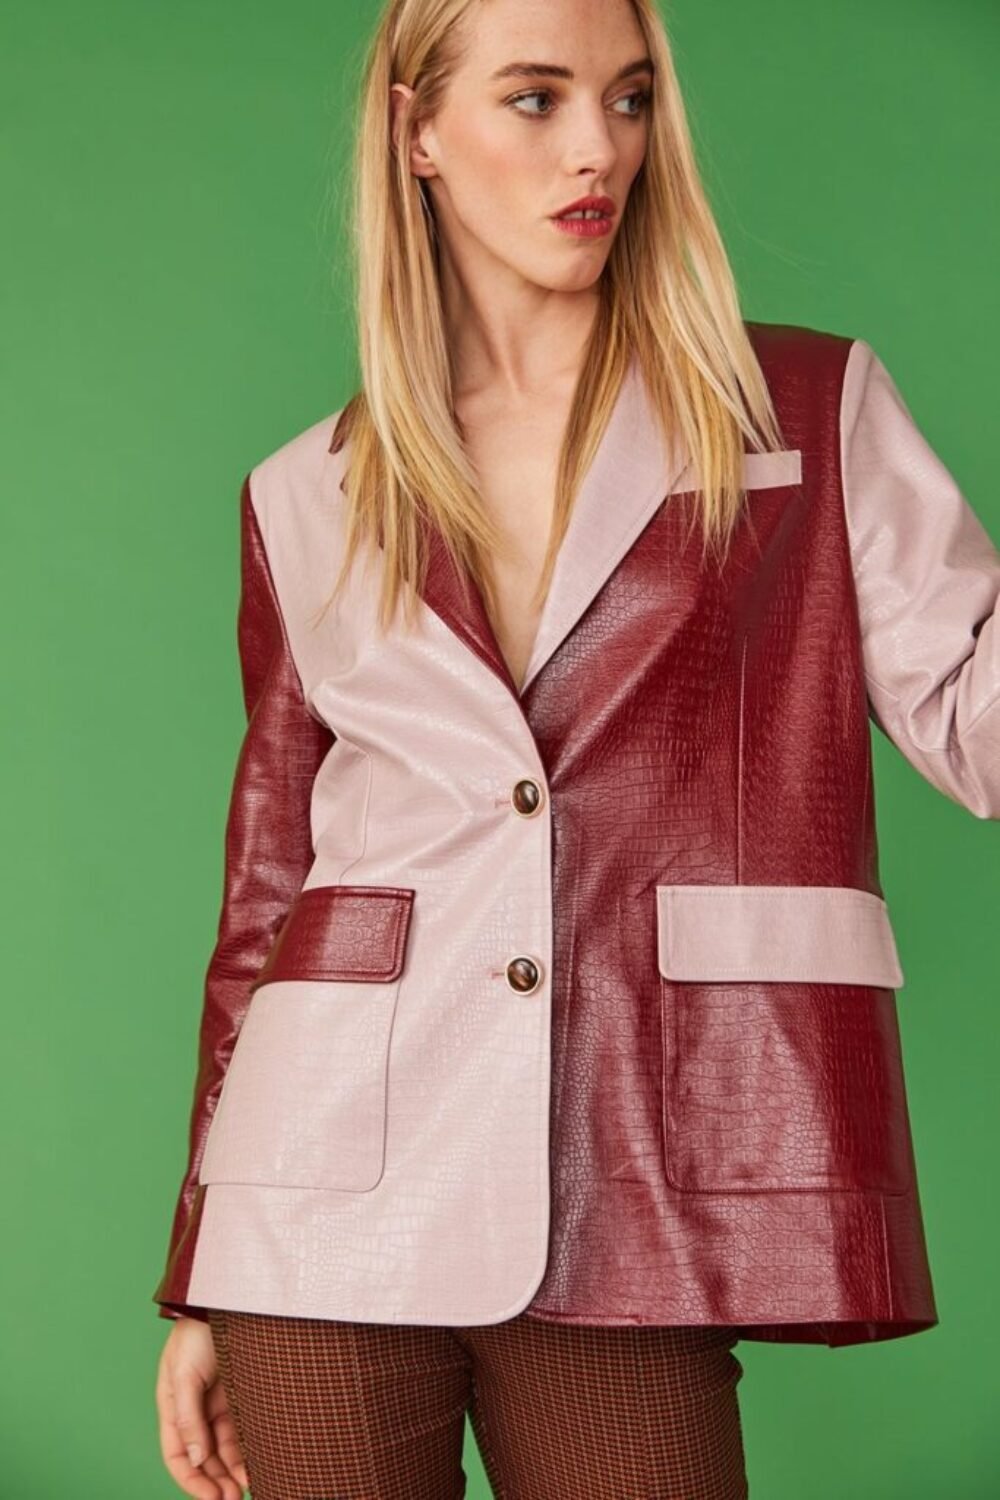 Shop Lux Baby Pink and Burgundy Leather Look Blazer and women's luxury and designer clothes at www.lux-apparel.co.uk